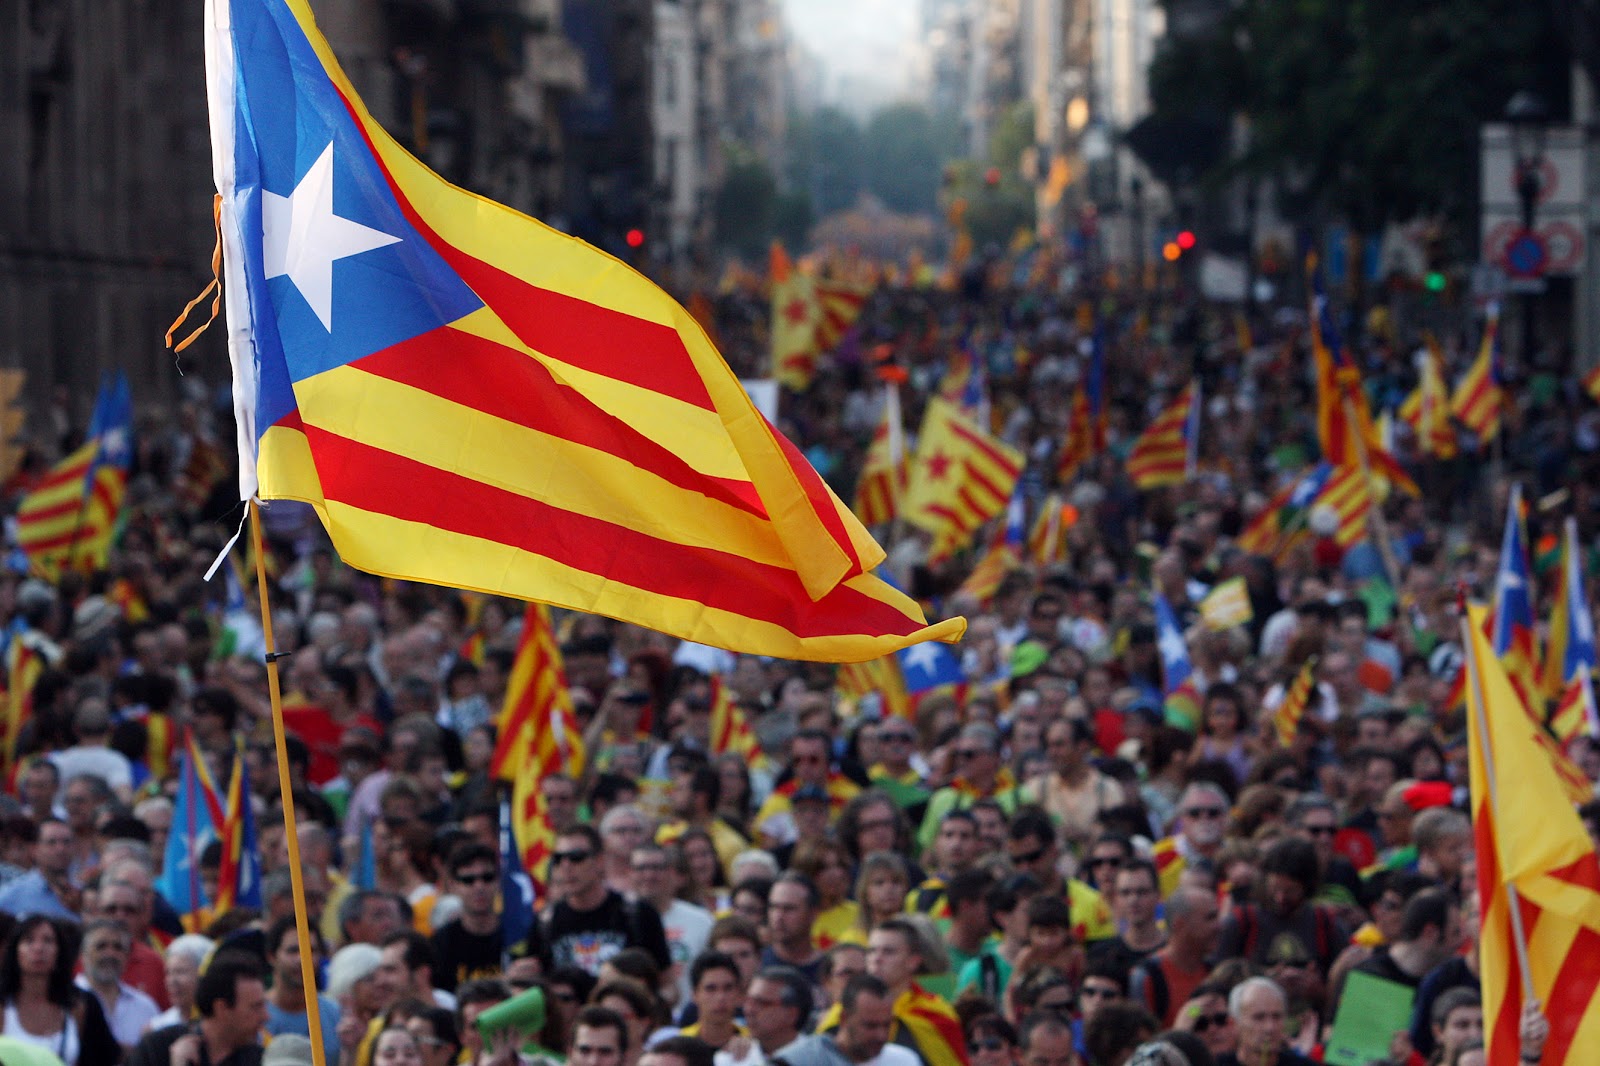 The Delegation will celebrate the Catalan language for Catalonia's